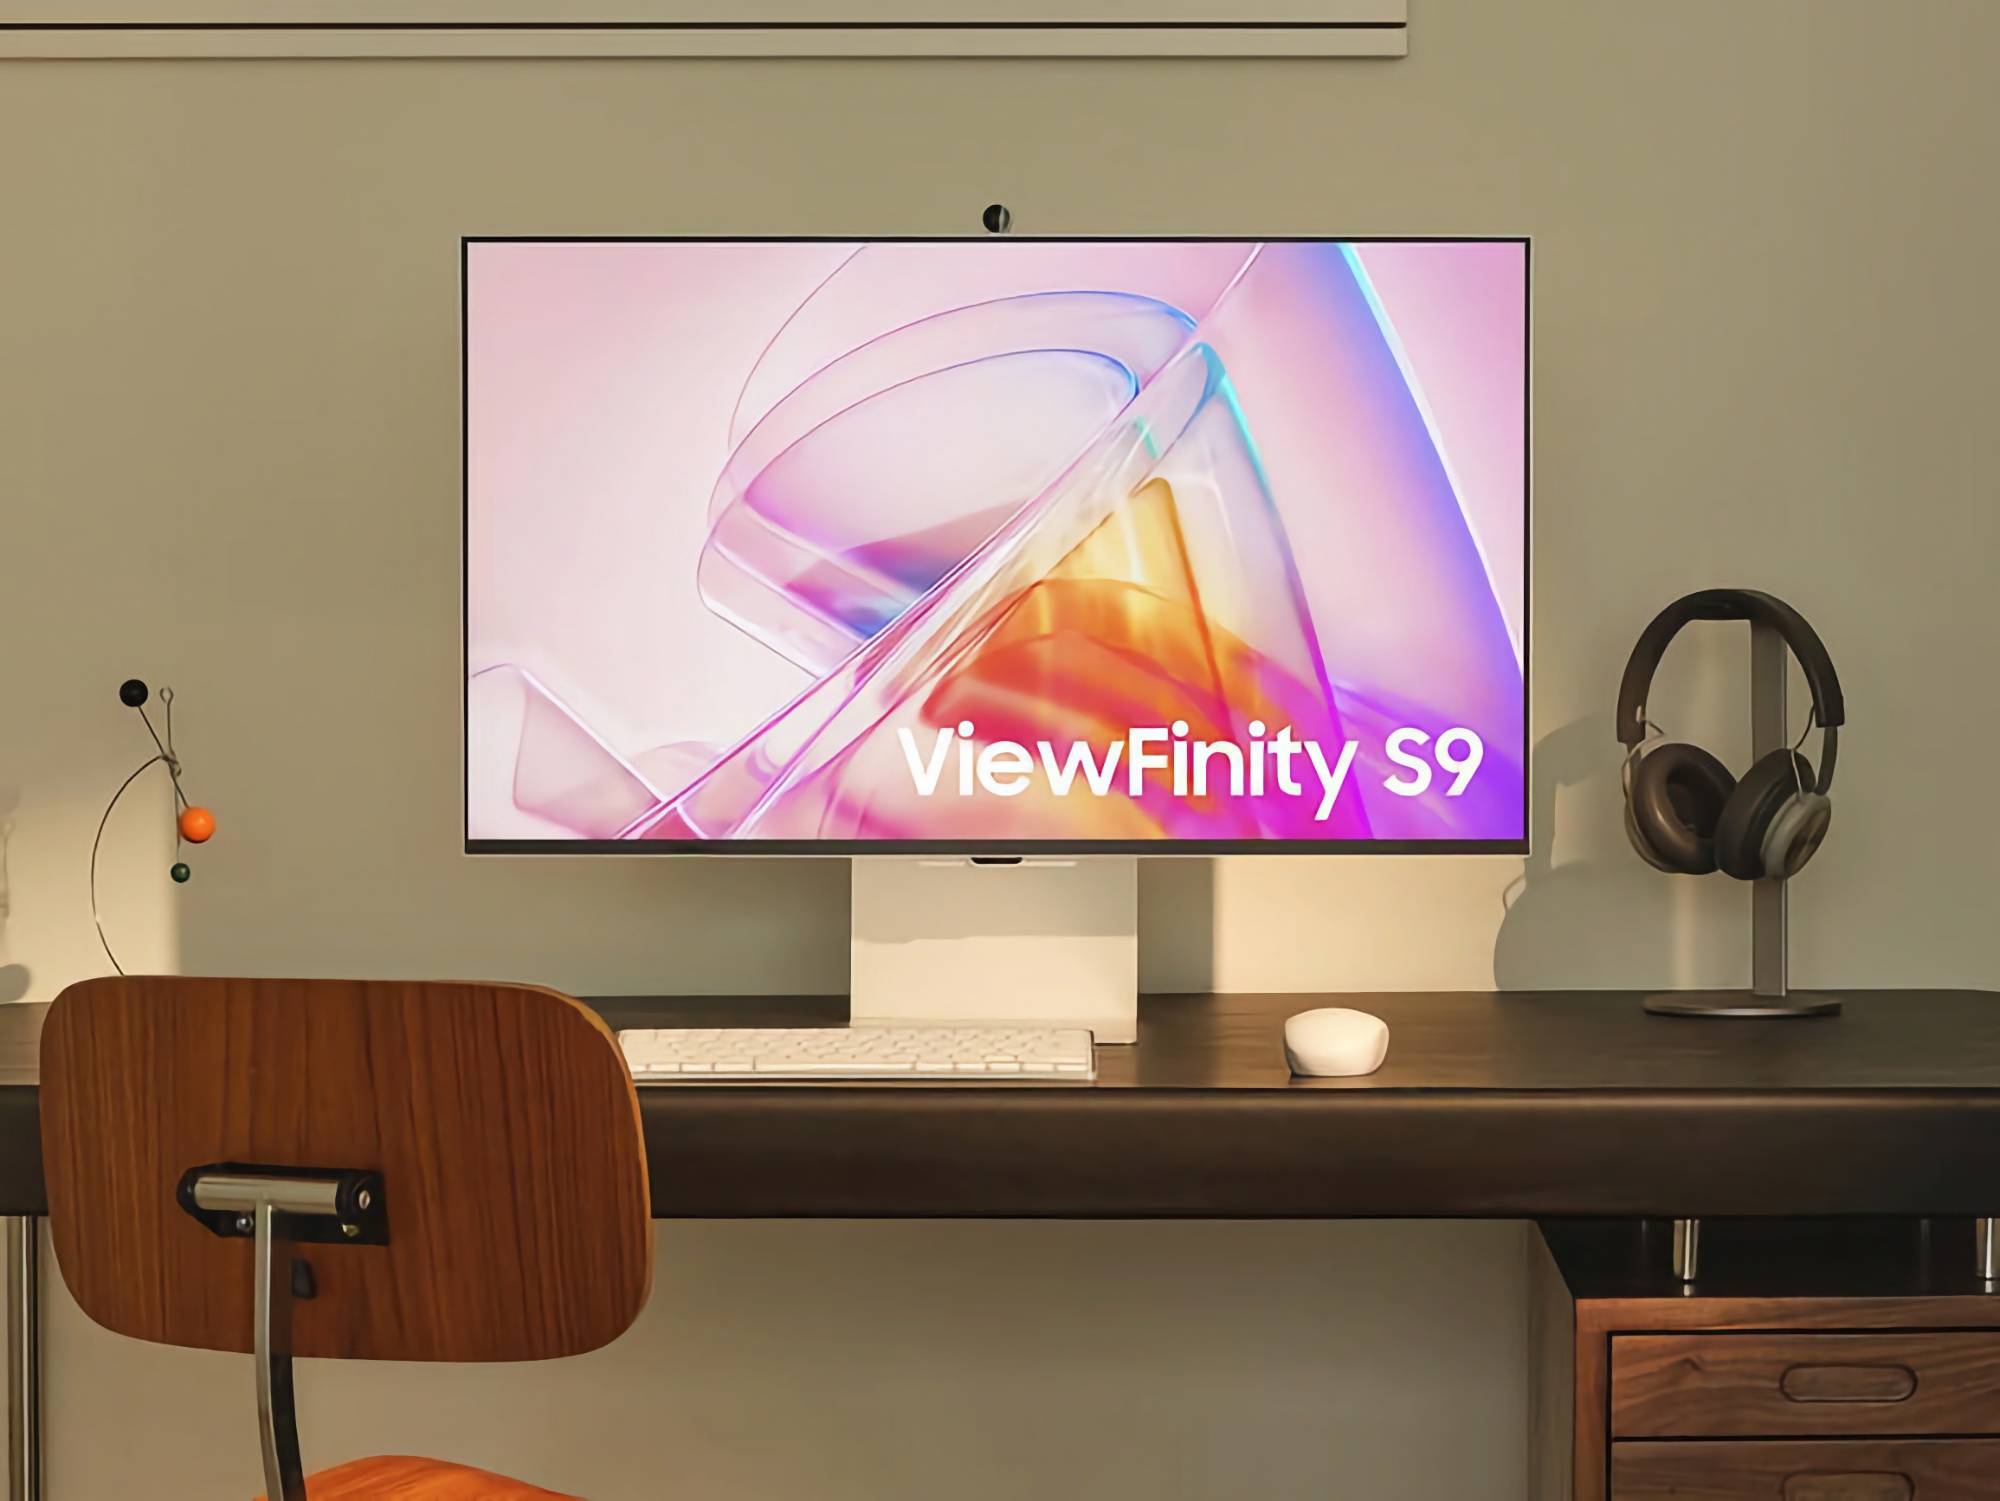 Apple Studio Display competitor: Samsung ViewFinity S9 5K monitor launched in the US